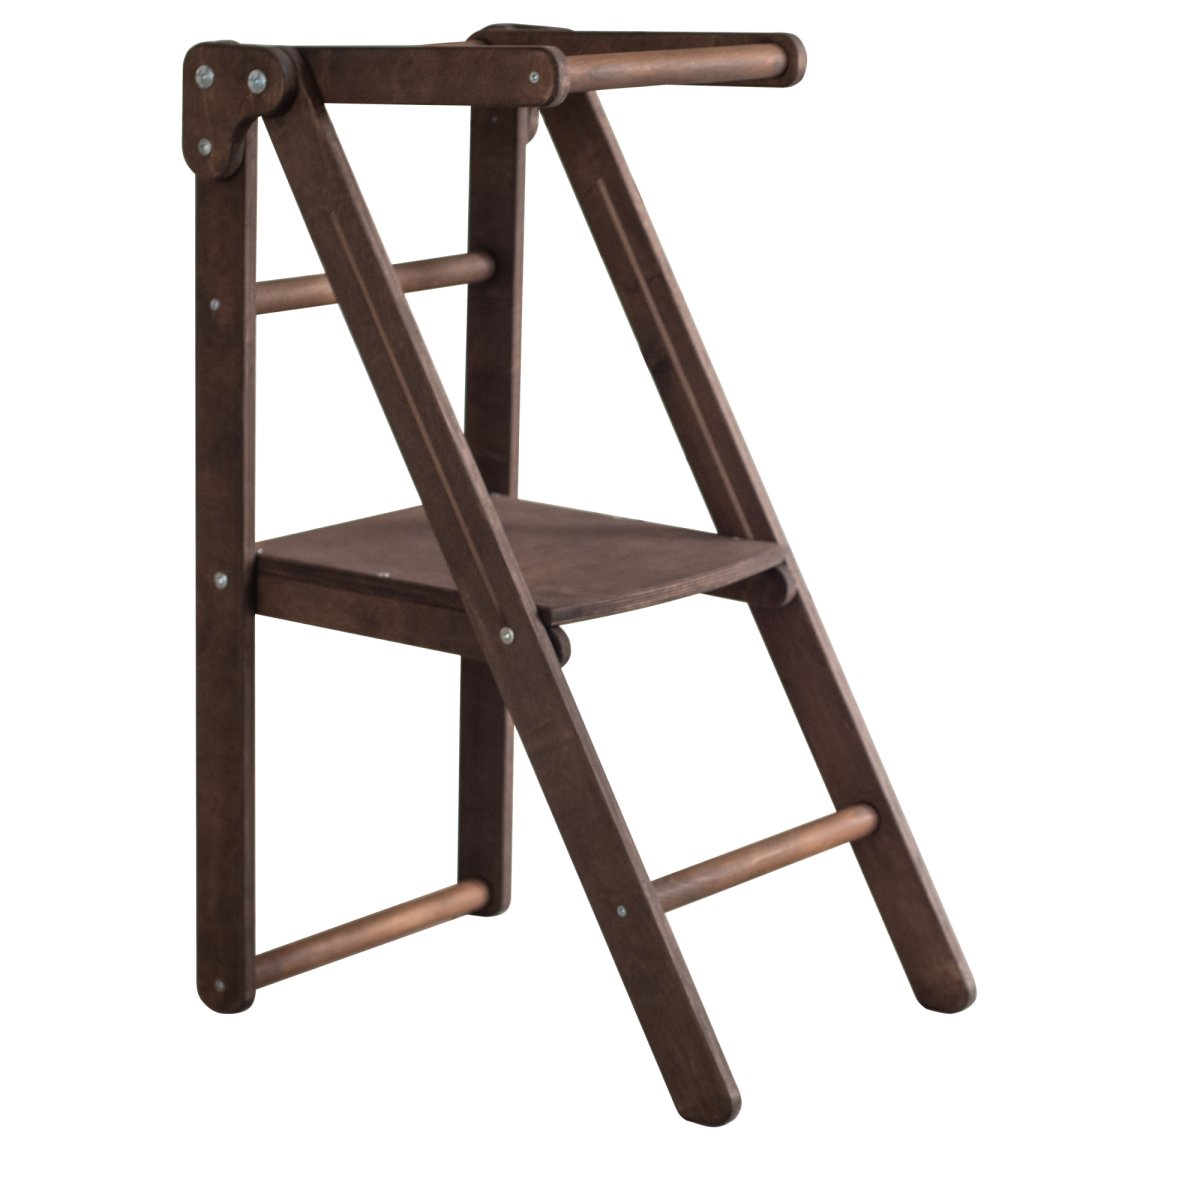 Wooden Step Stool for Preschool - Kid Chair That Grows - Chocolate